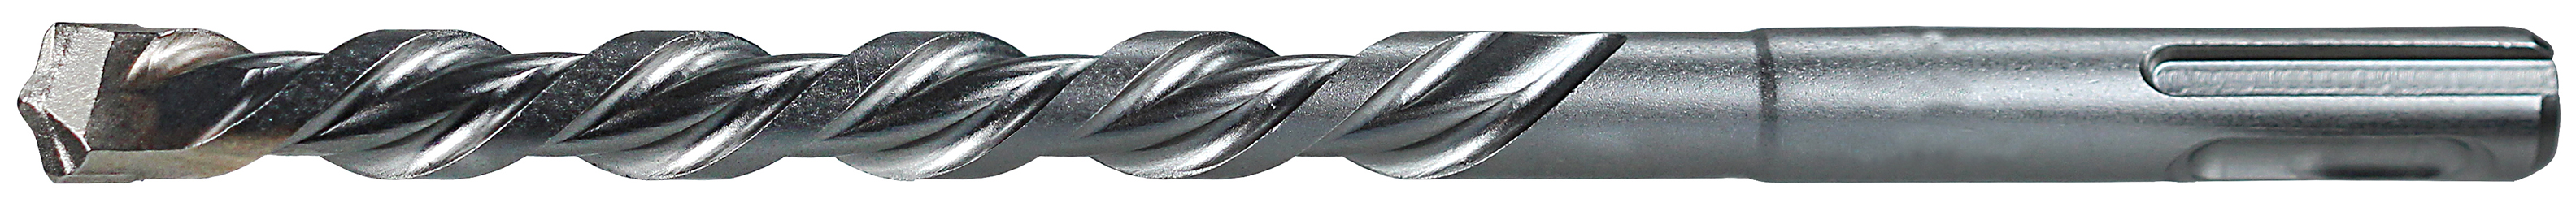 Rotary Hammer Drill Bit, 7/32 in. bit diameter, 4-1/2 in. overall length, Straight shank type, 3 flutes, Tip-Carbide material, 2 in. drilling depth